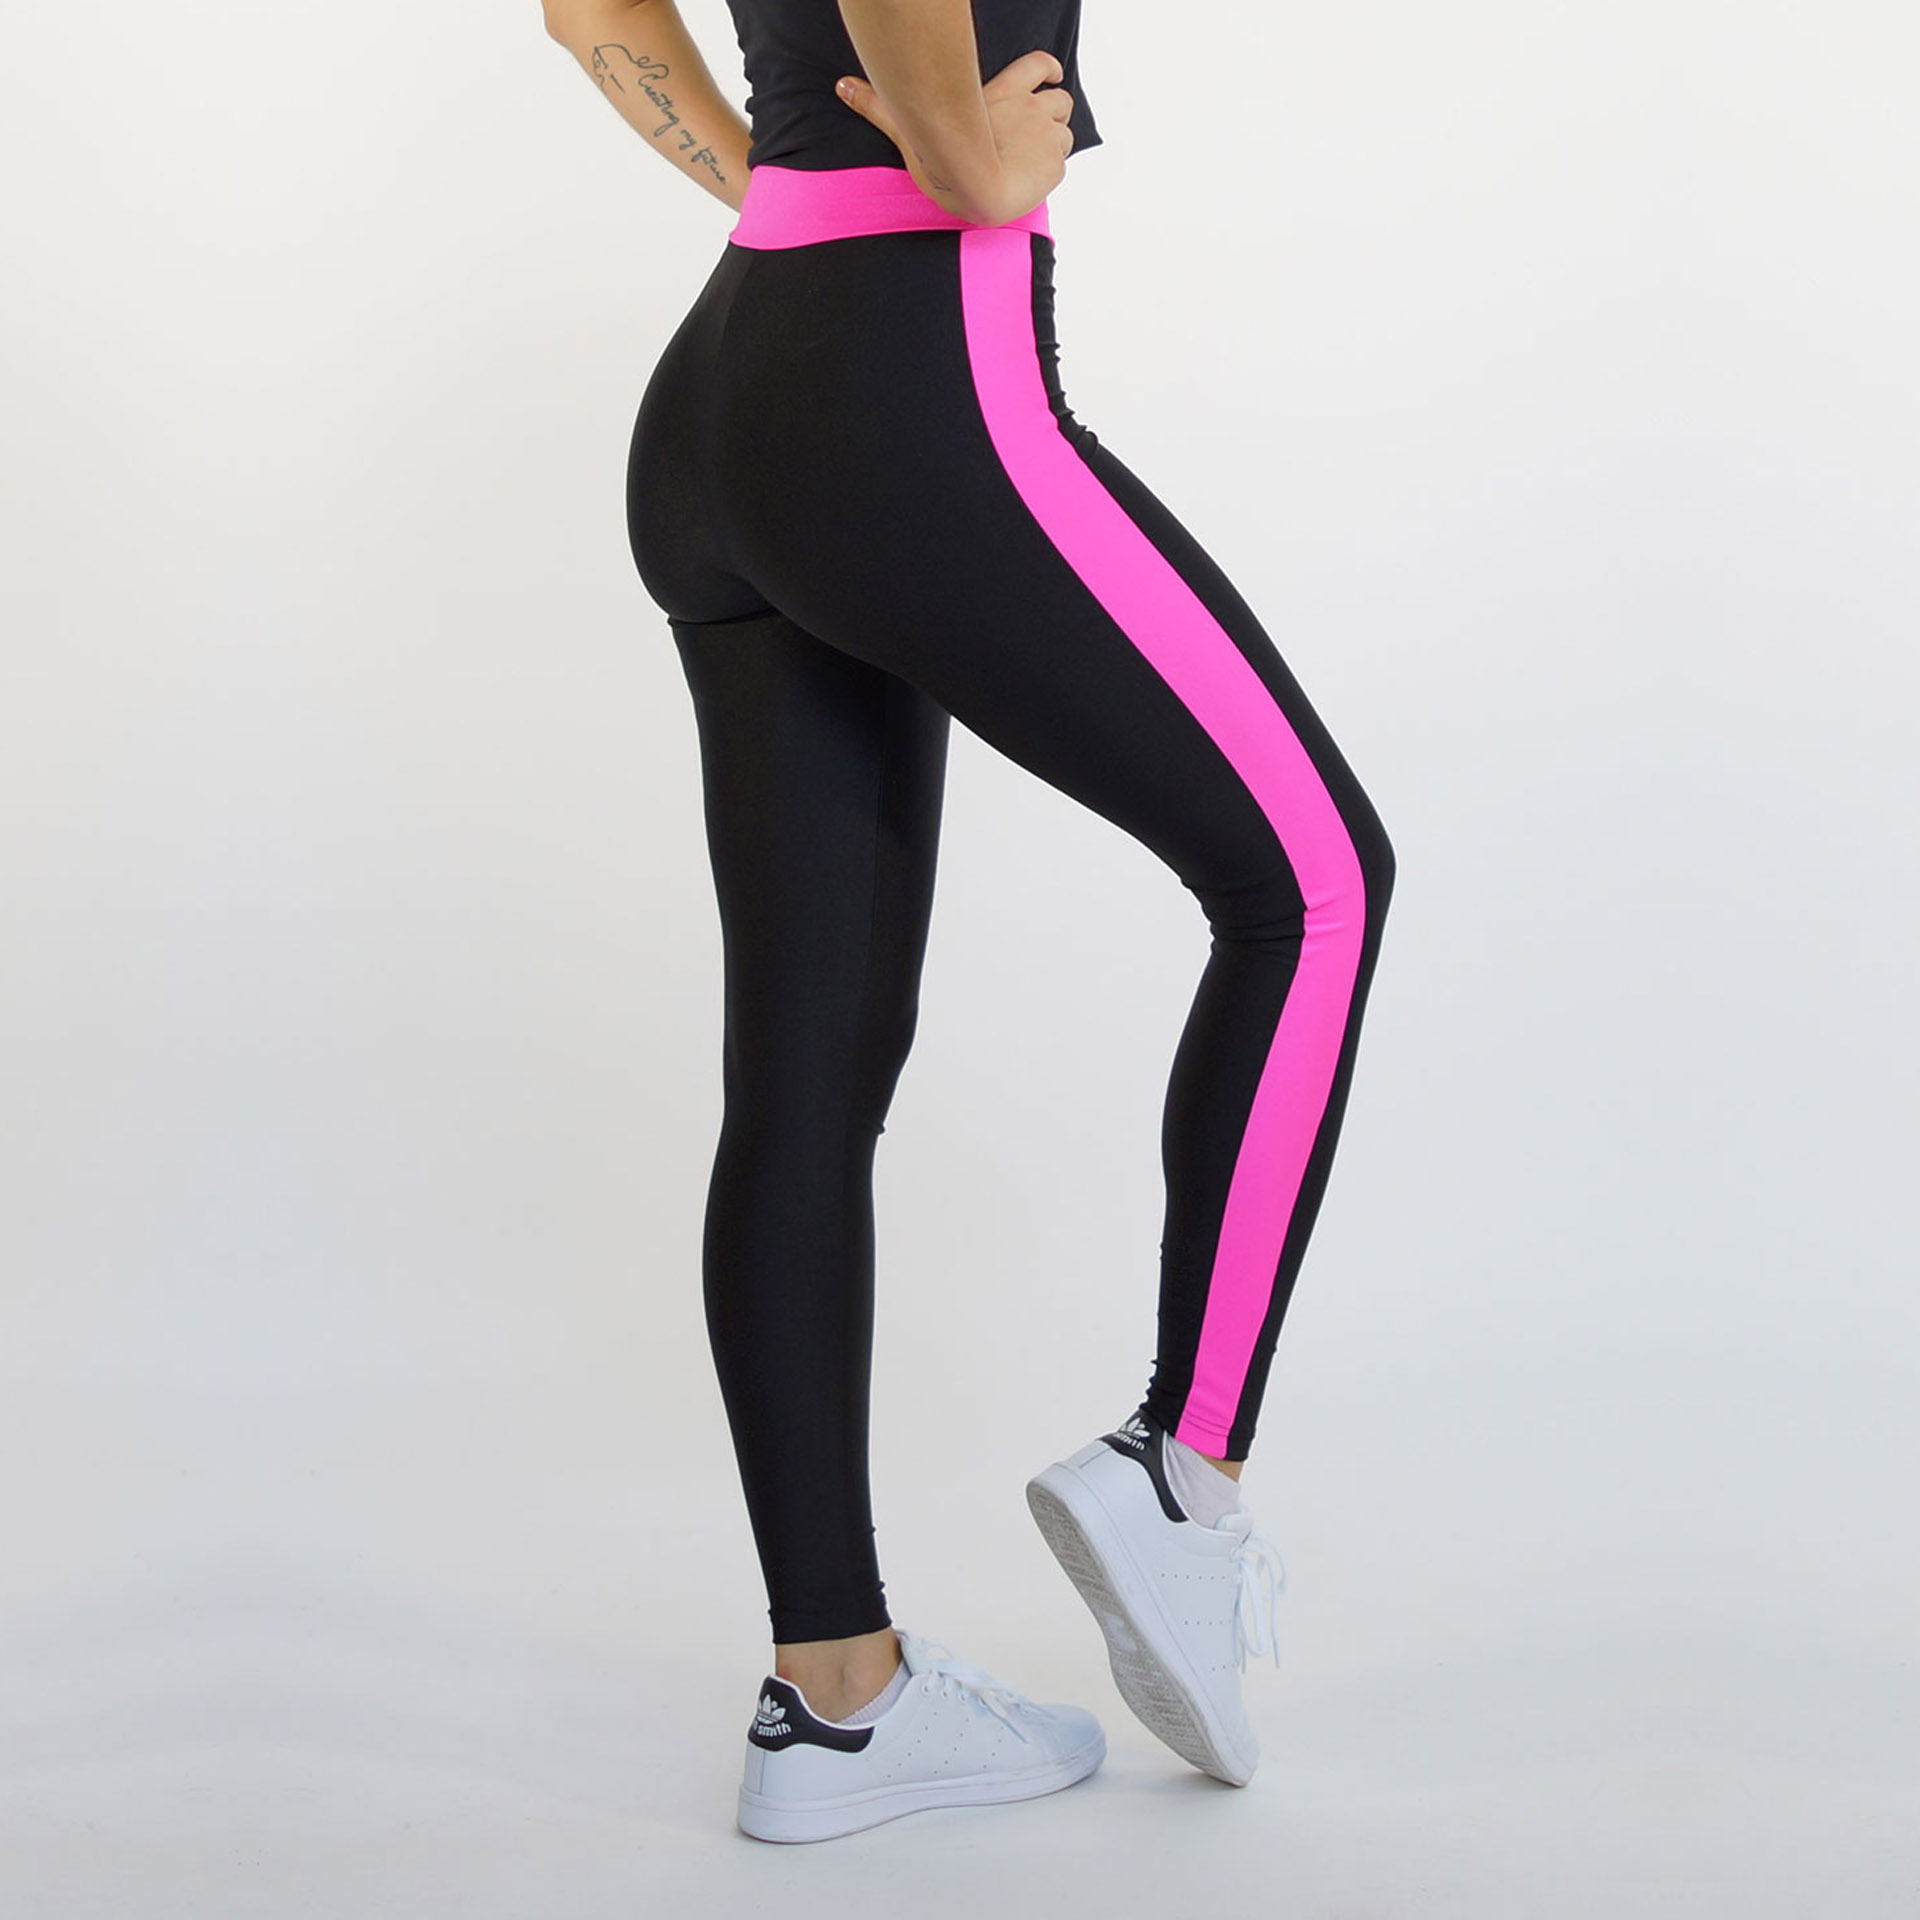 Athletic Wear for Women: Tall Black Pink Stripe Athletic Pant